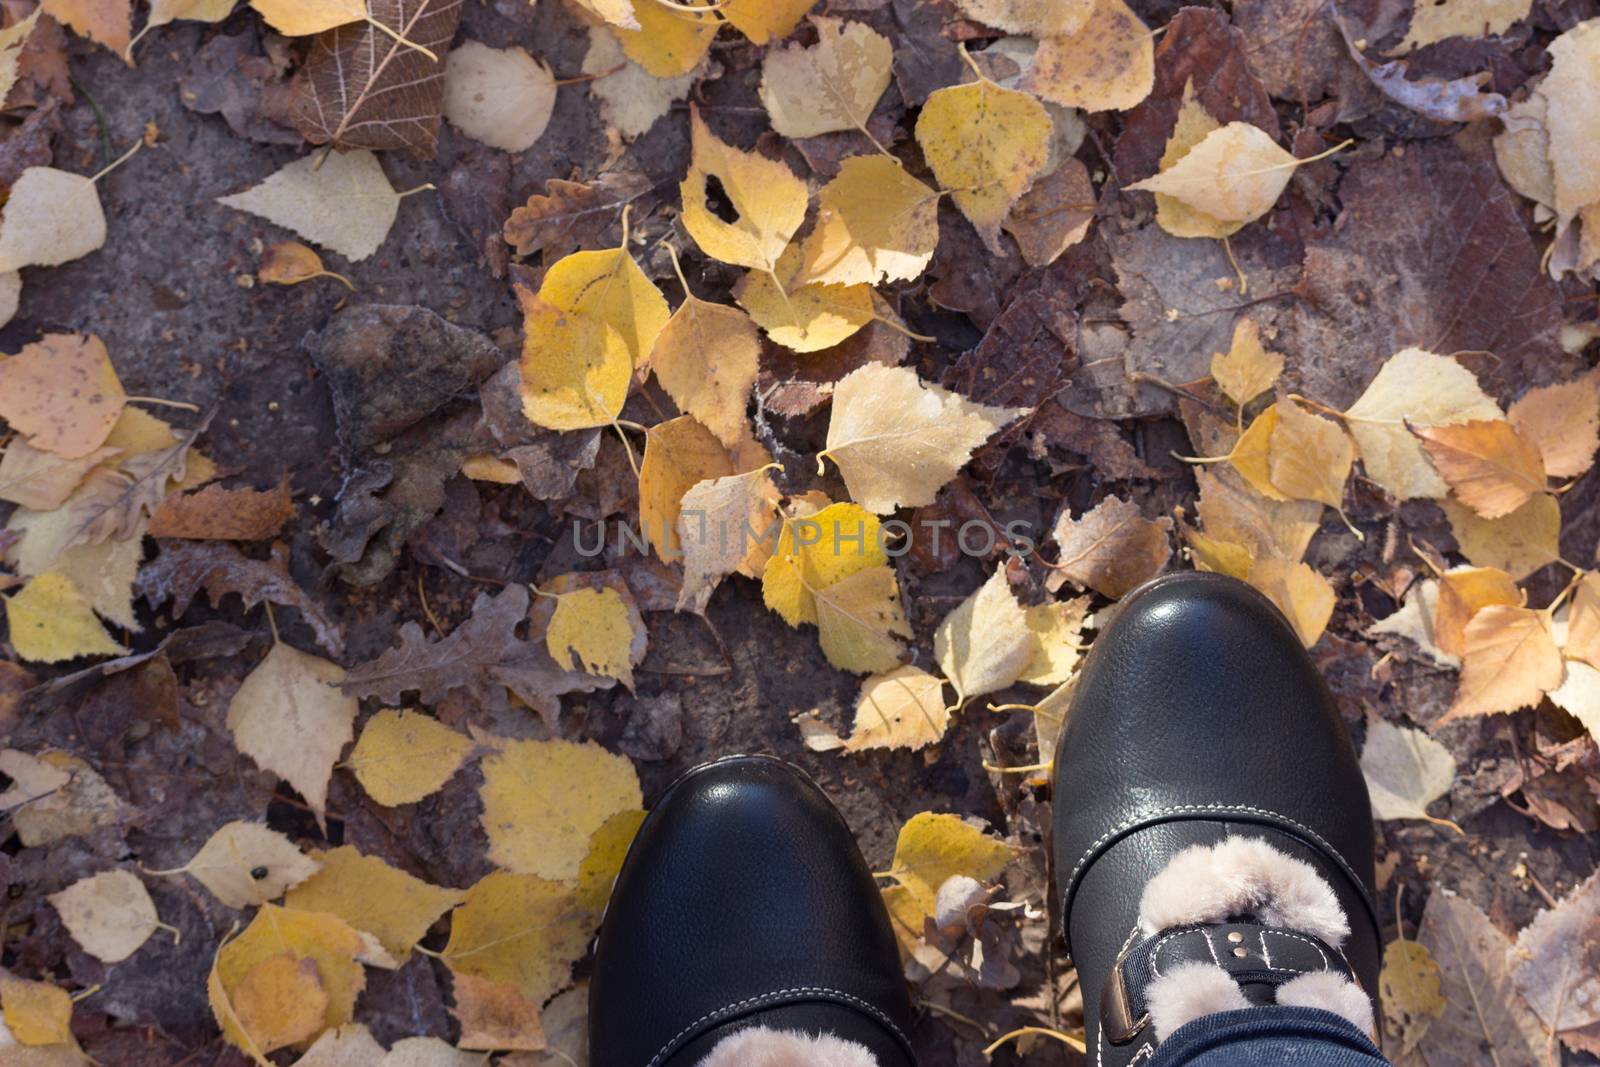 Women's legs in dark shoes standing on a yellow fall leaves to autumn park